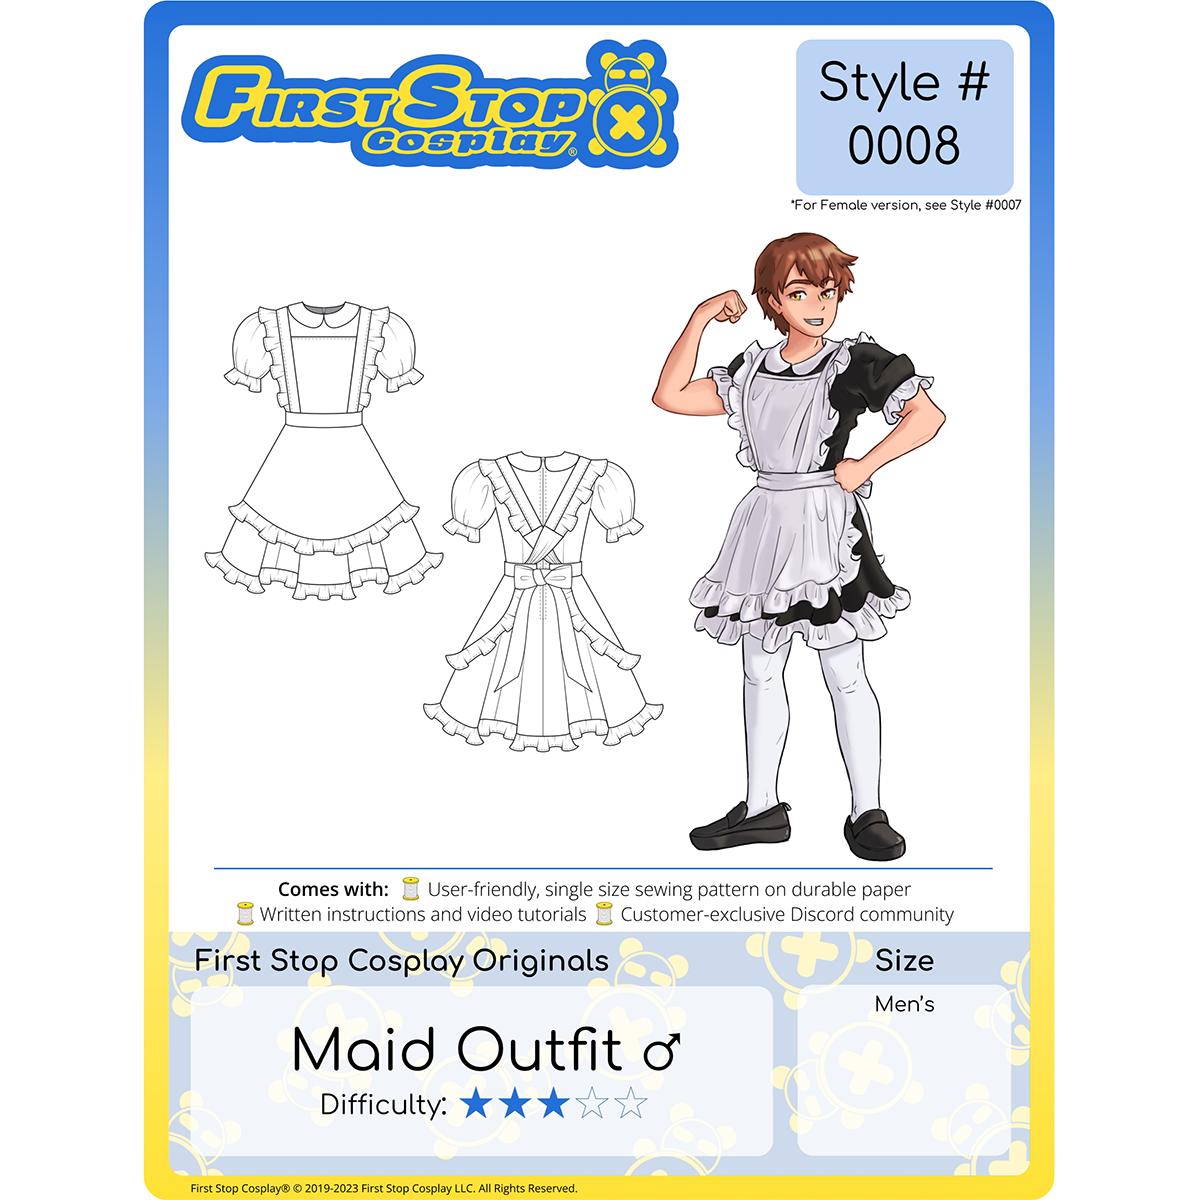 A graphic of the front packaging for Style #0008- Maid Outfit (male). The First Stop Cosplay logo is in the top left corner. Below the logo is line art of the completed pattern. To the right is an image of our male character, Dah, wearing the completed Maid Outfit. This pattern is 3 stars in difficulty.